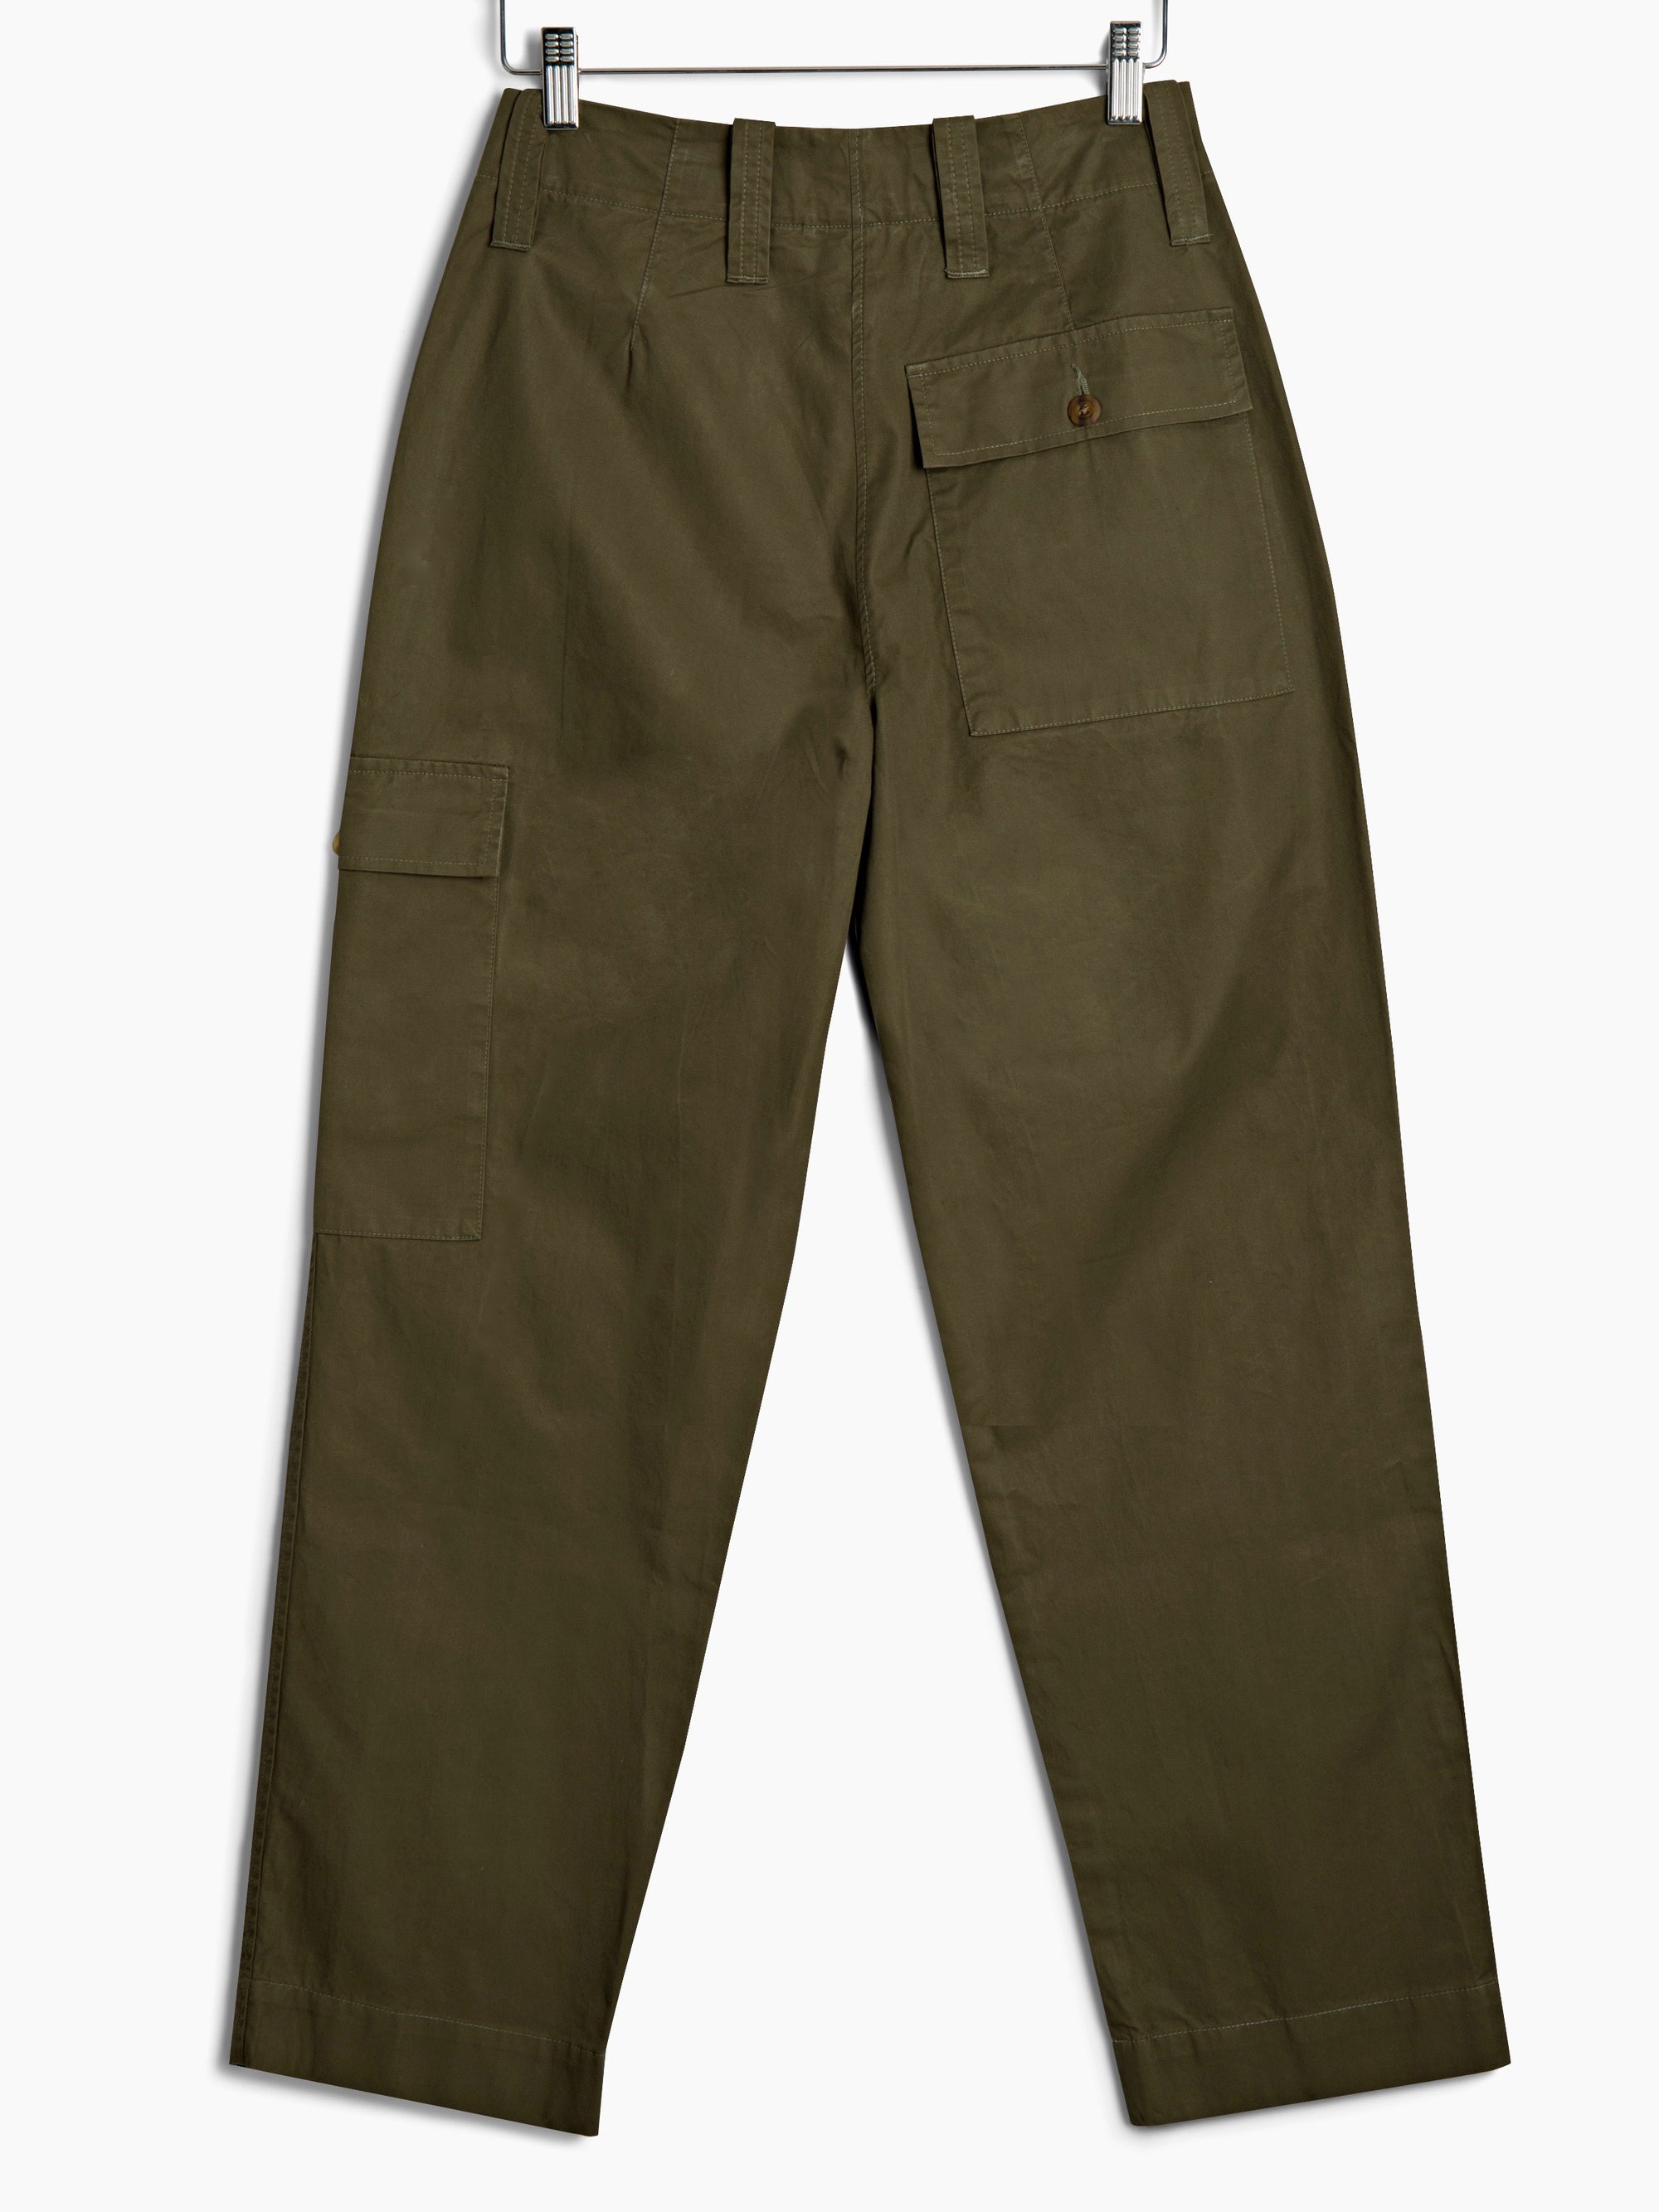 Military Style Cargo Pants, Trousers, Hickman & Bousfield - Hickman & Bousfield, Safari and Travel Clothing